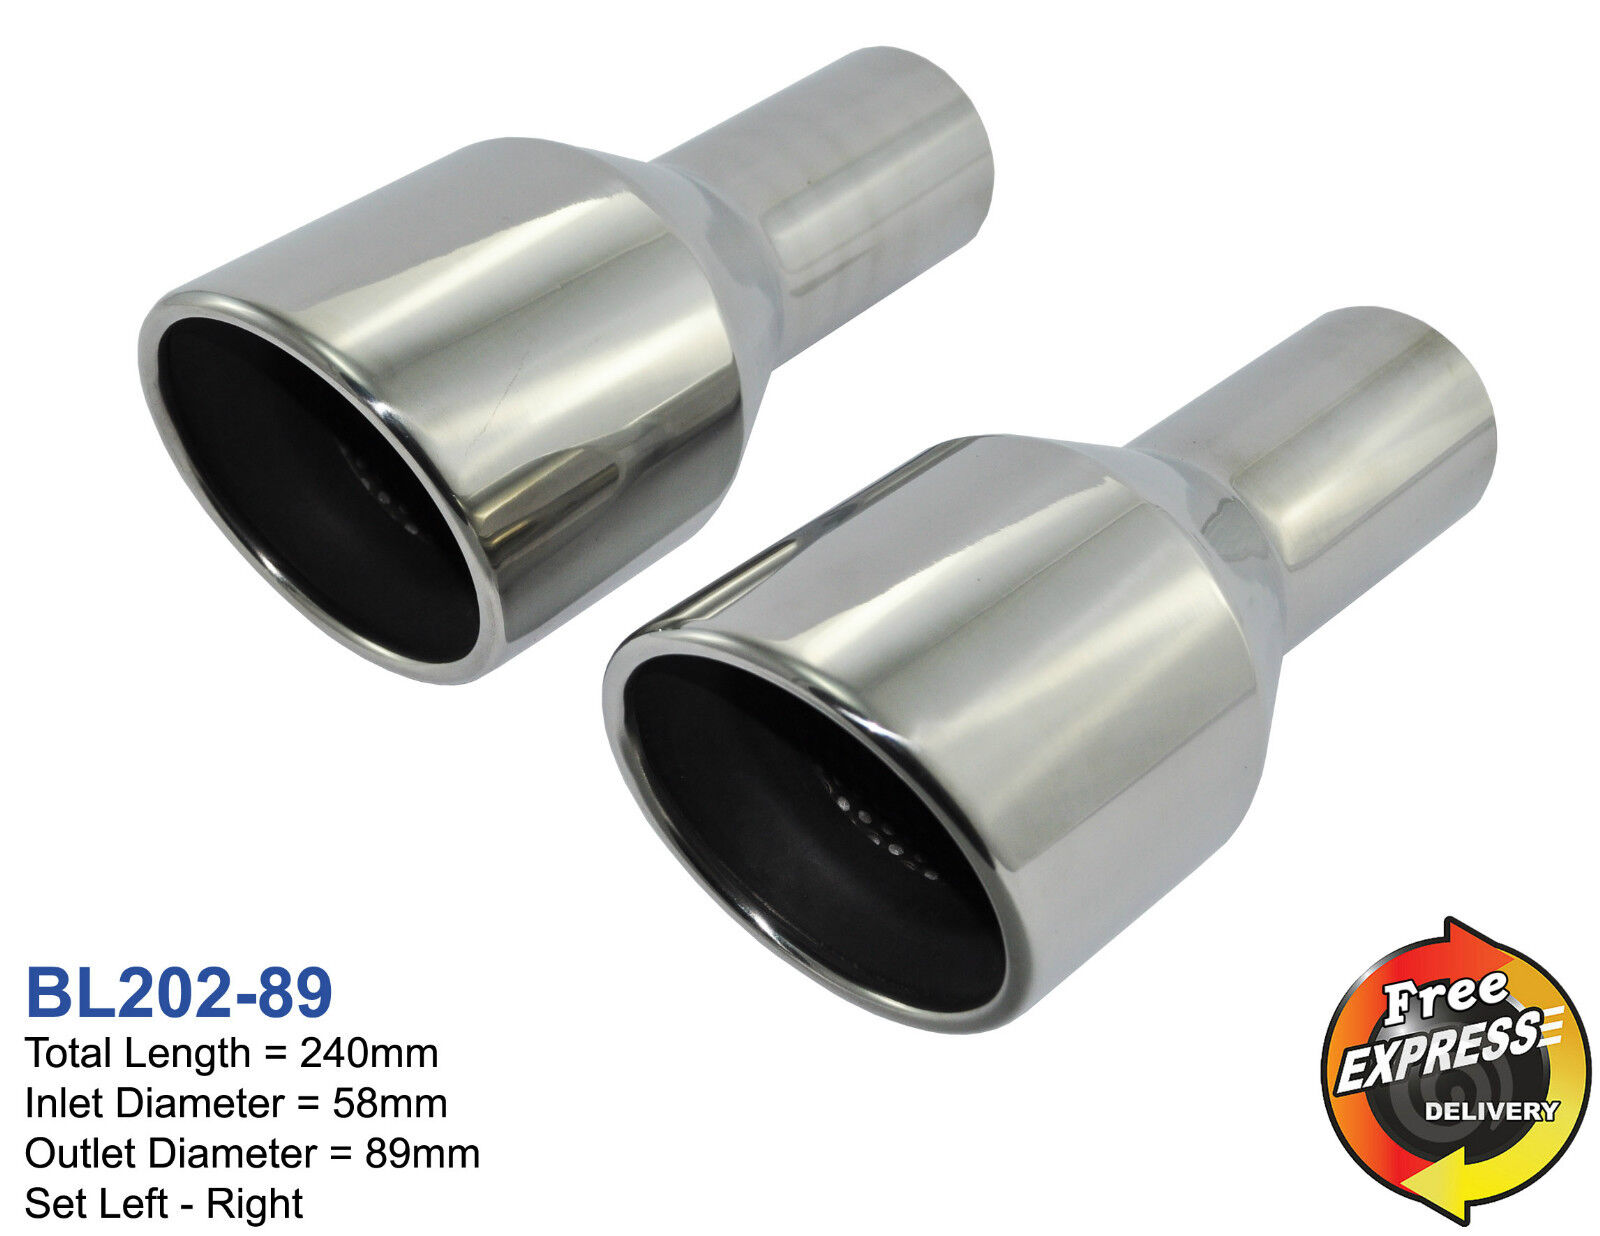 Exhaust tailpipes tips s/steel for VW Golf R32 R20 Audi A4 A5 A6 A7 A8 TT 89mm